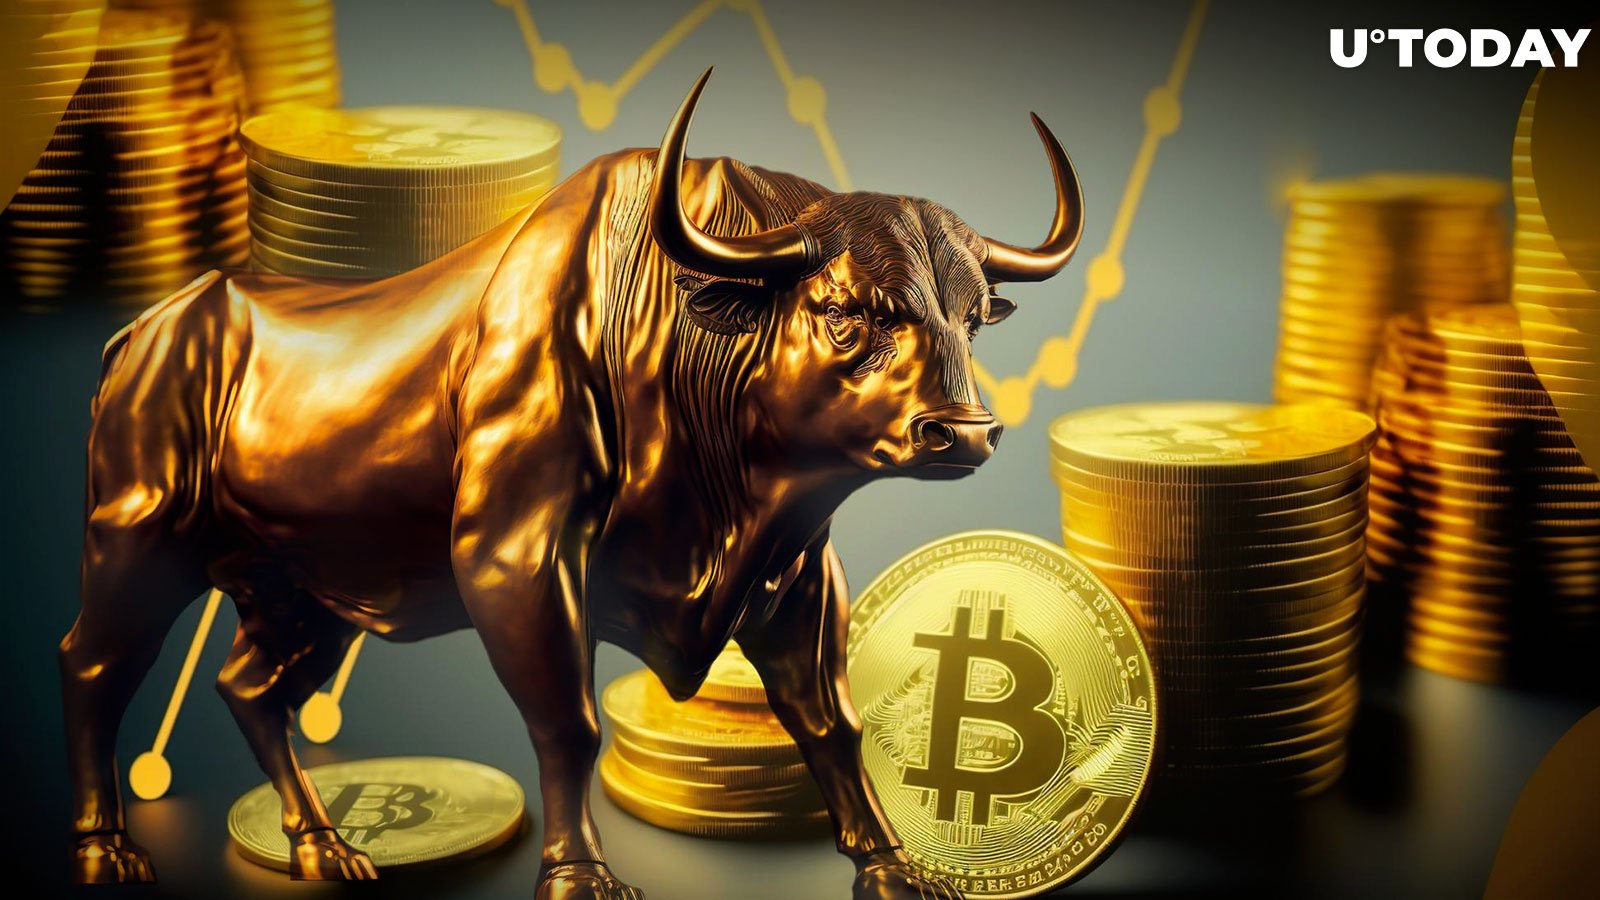 Bitcoin Bull Run in Early Stages as Major Holders Accumulate: Bloomberg Analyst